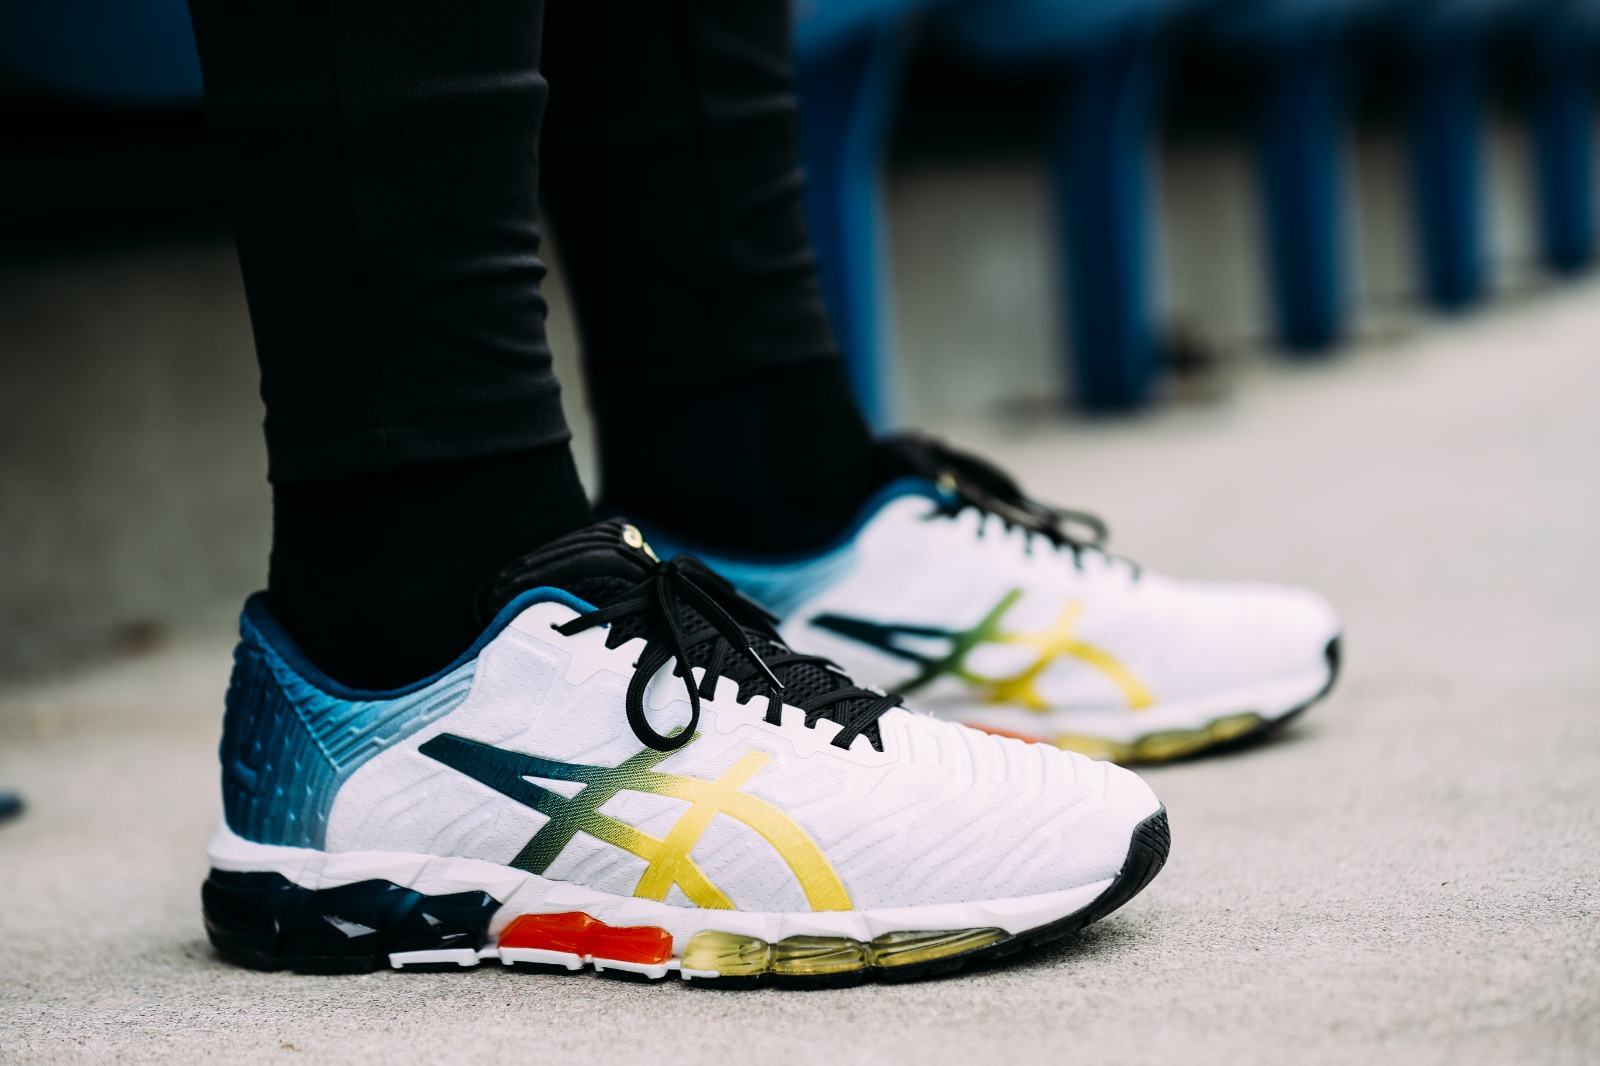 womens asics running shoes on sale